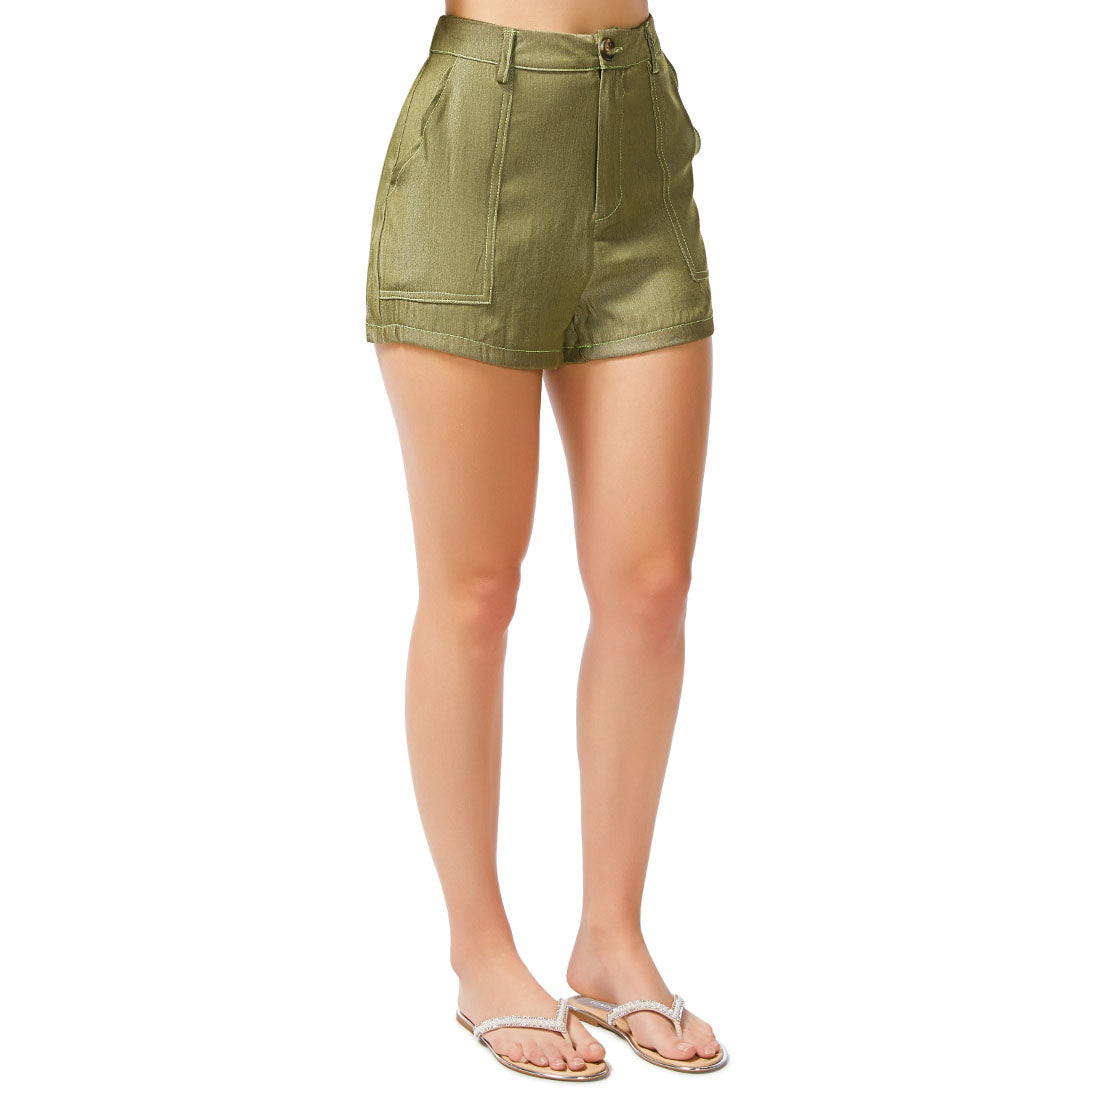 Shorts in Contrast Seam